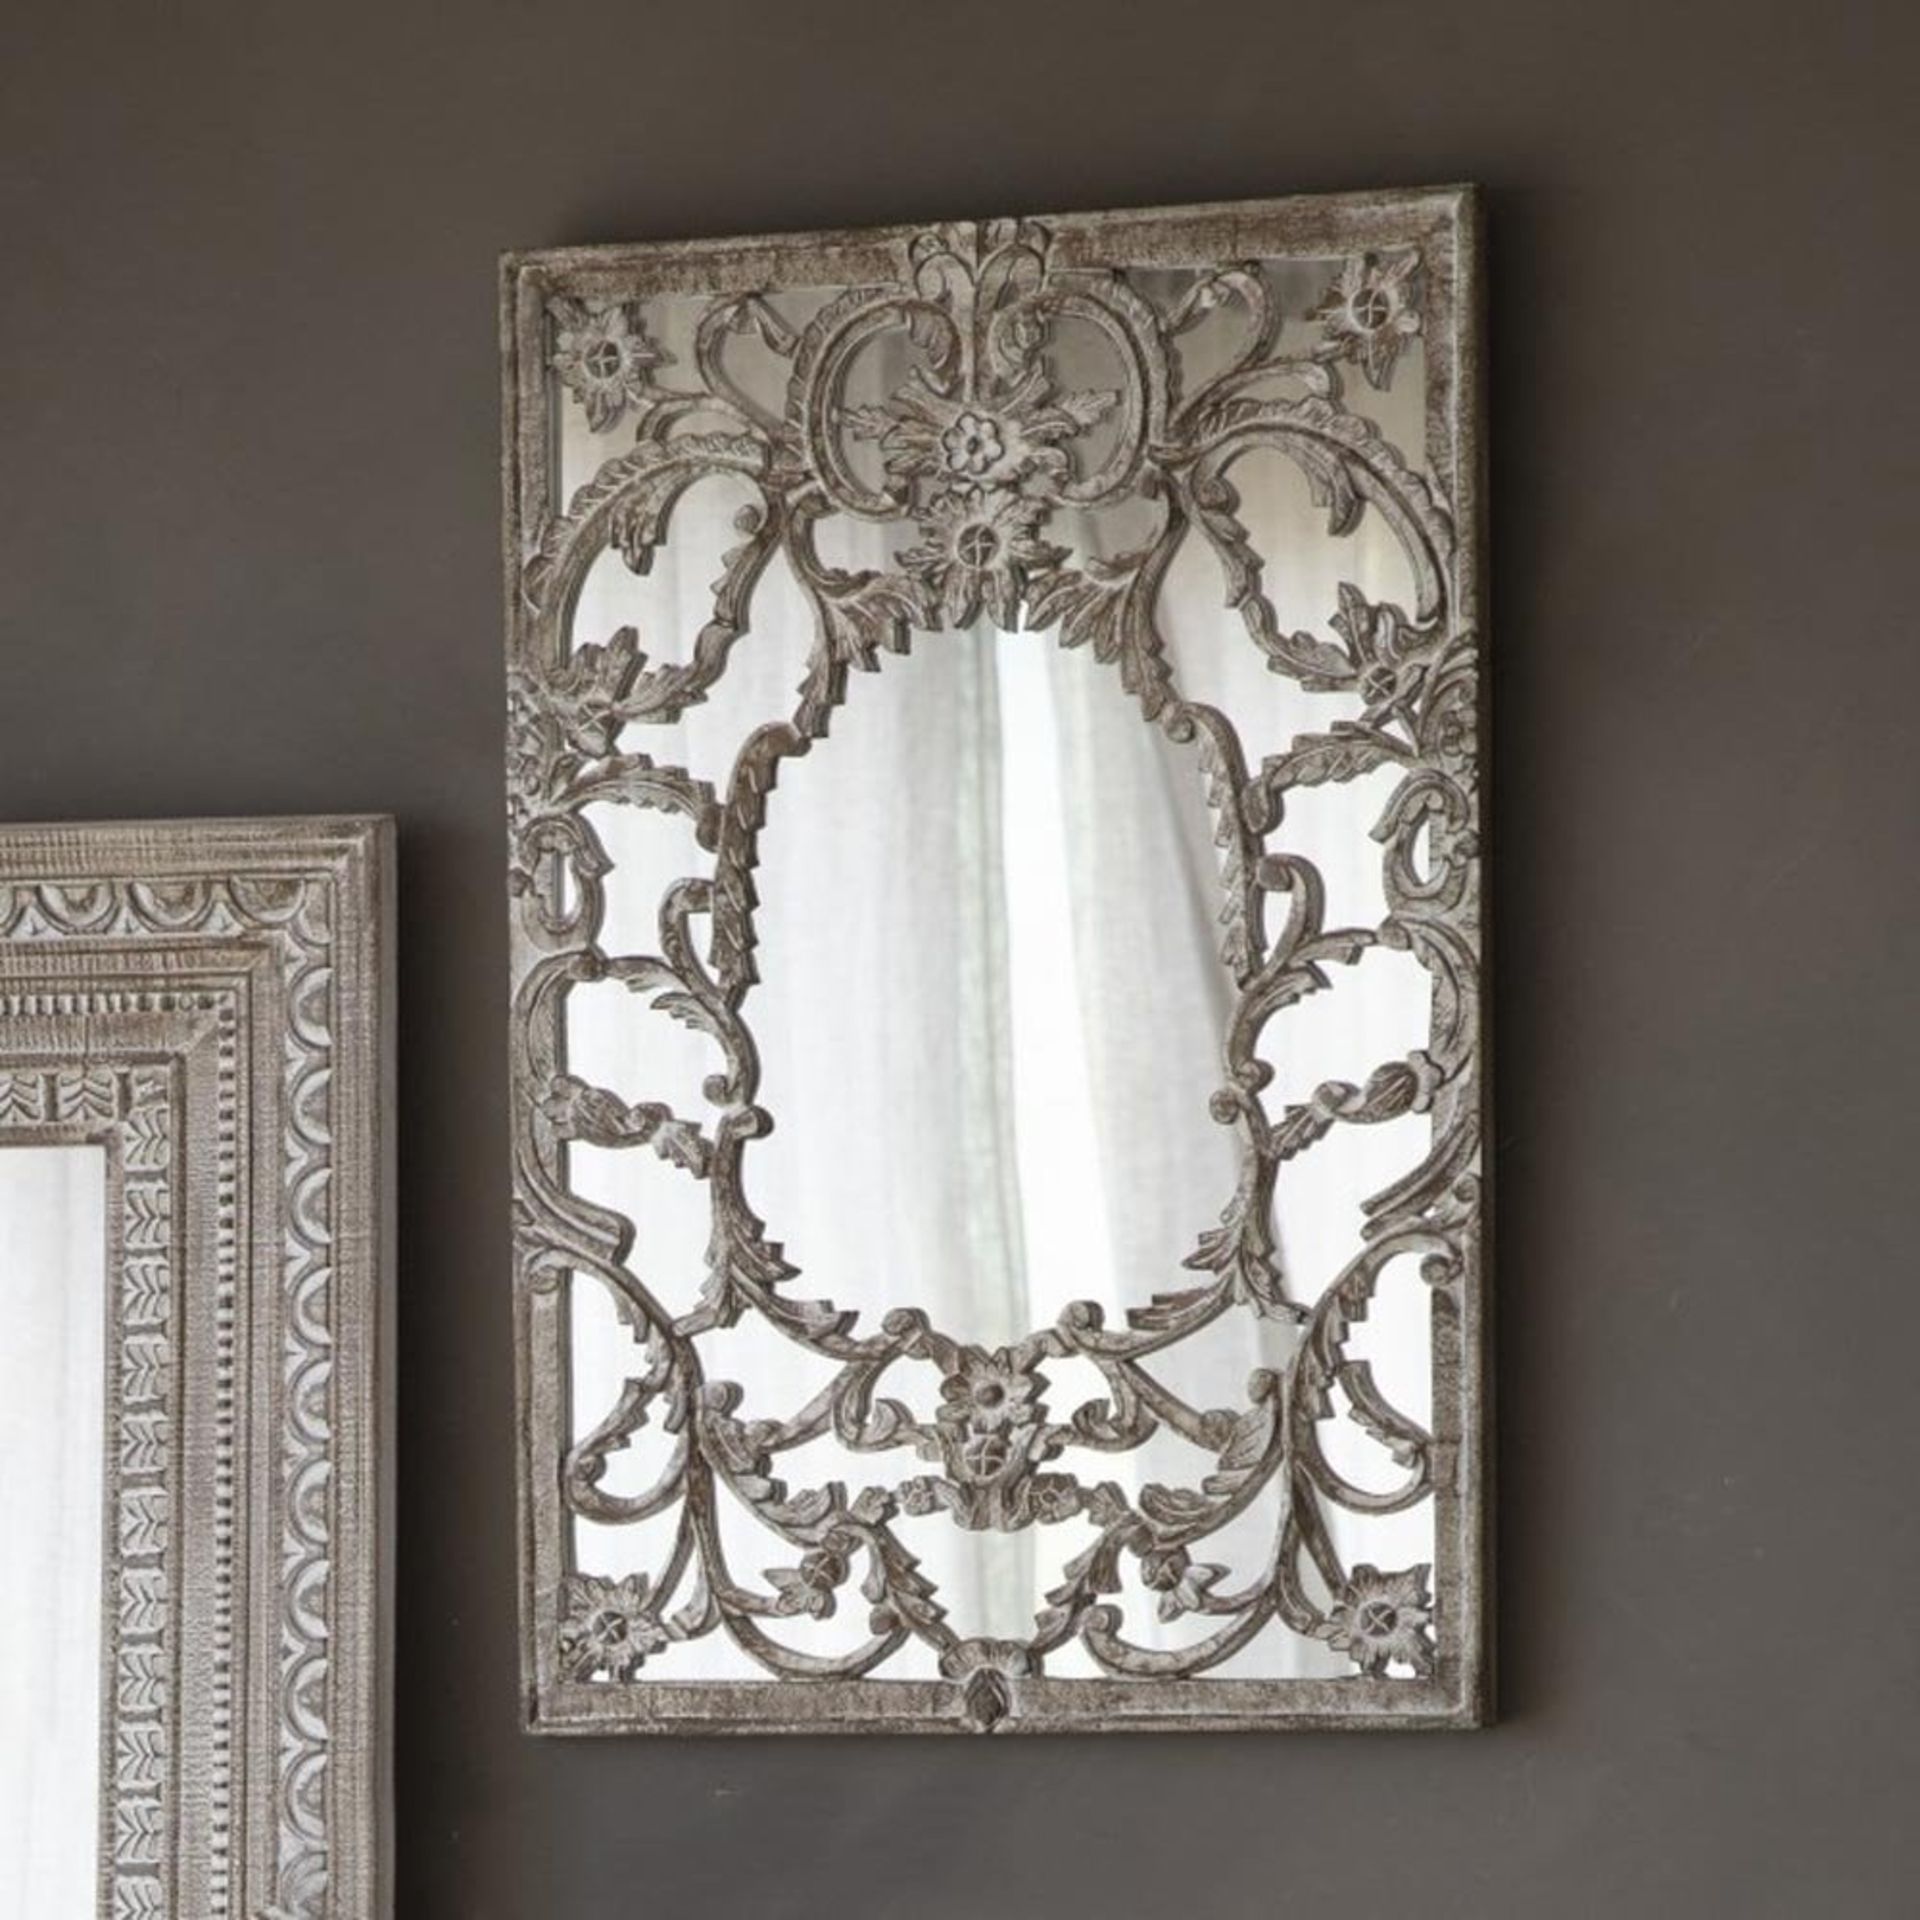 Limi Mirror 610 x 920mm White Washed An Ornate Artisan-Style Wall Mirror With An Intricate Design,